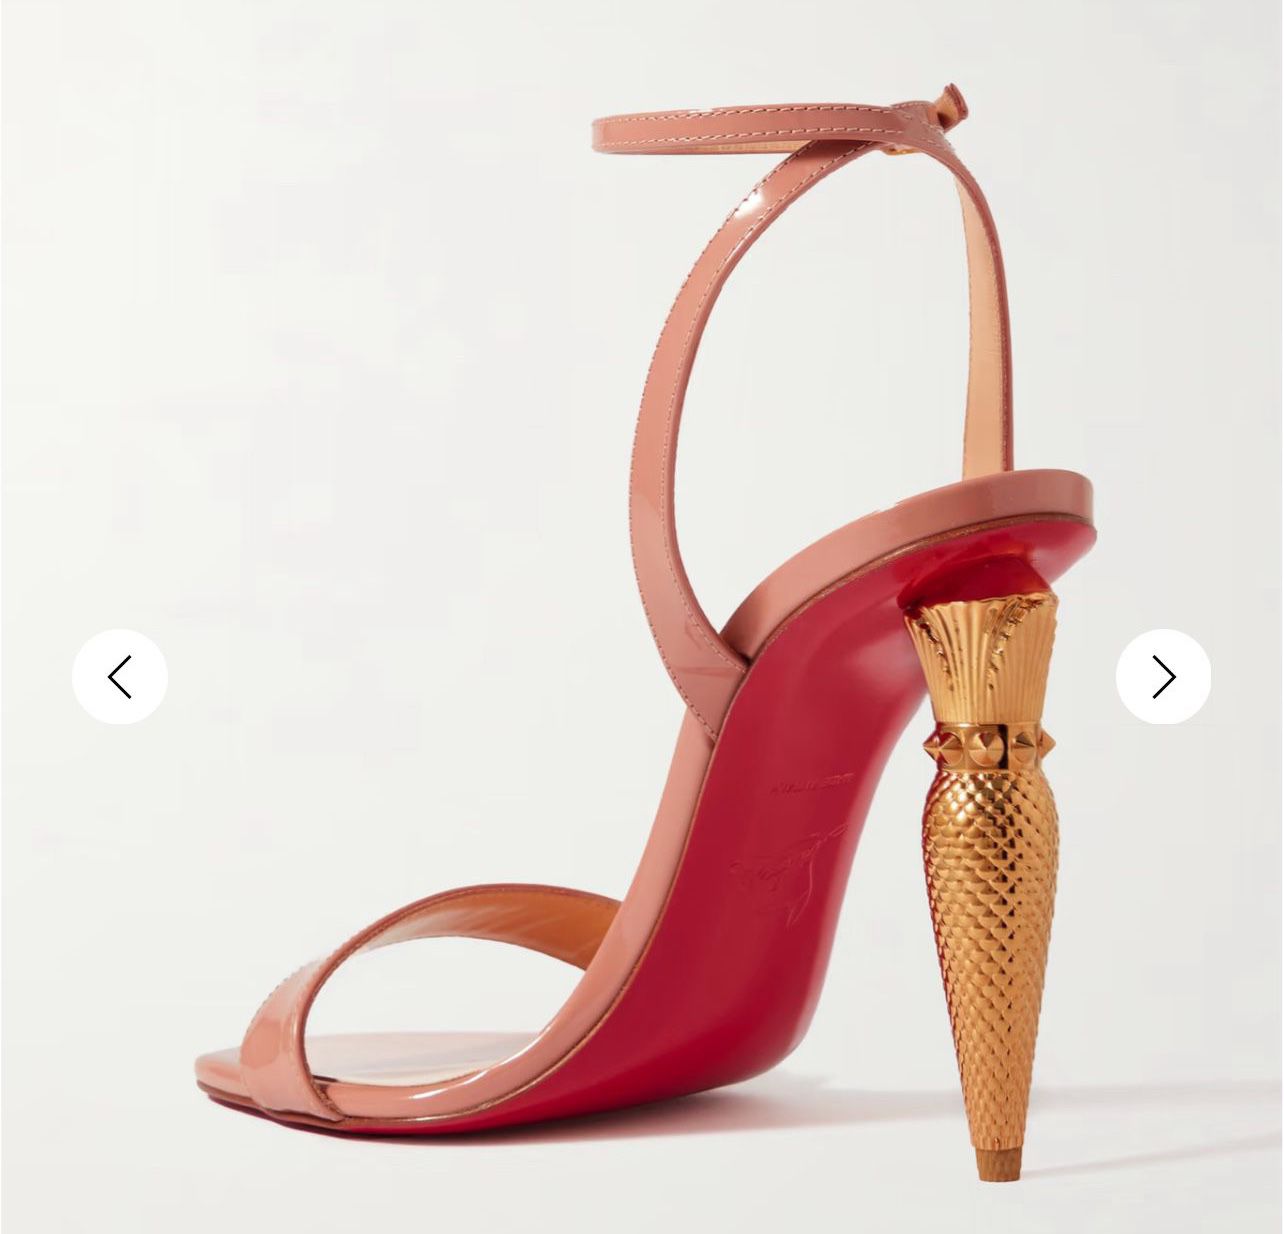 CHRISTIAN LOUBOUTIN Lipqueen 100 patent nude sandals